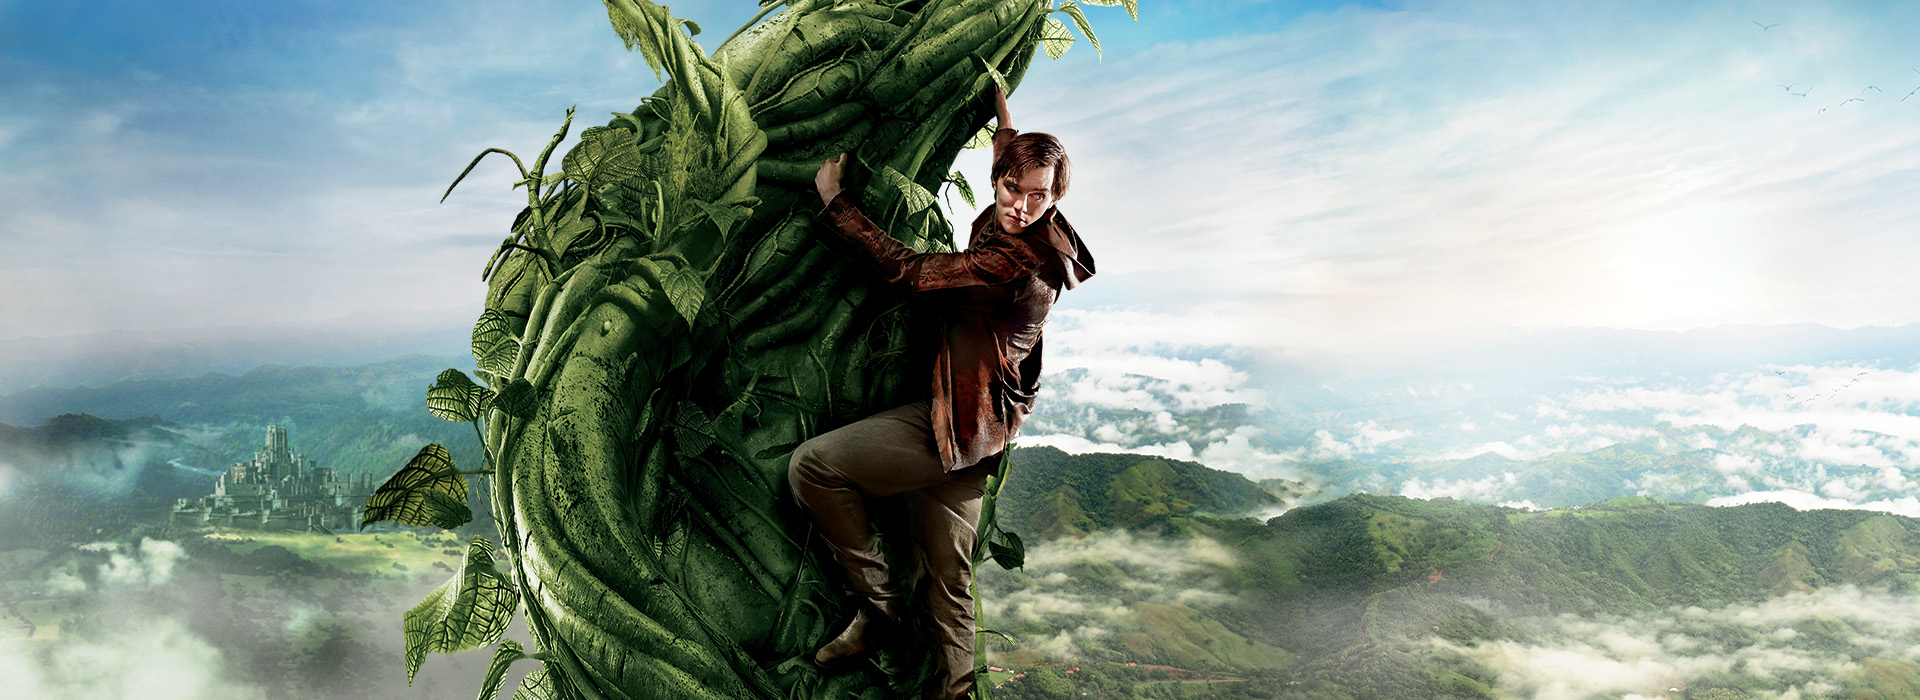 Movie poster Jack the Giant Slayer